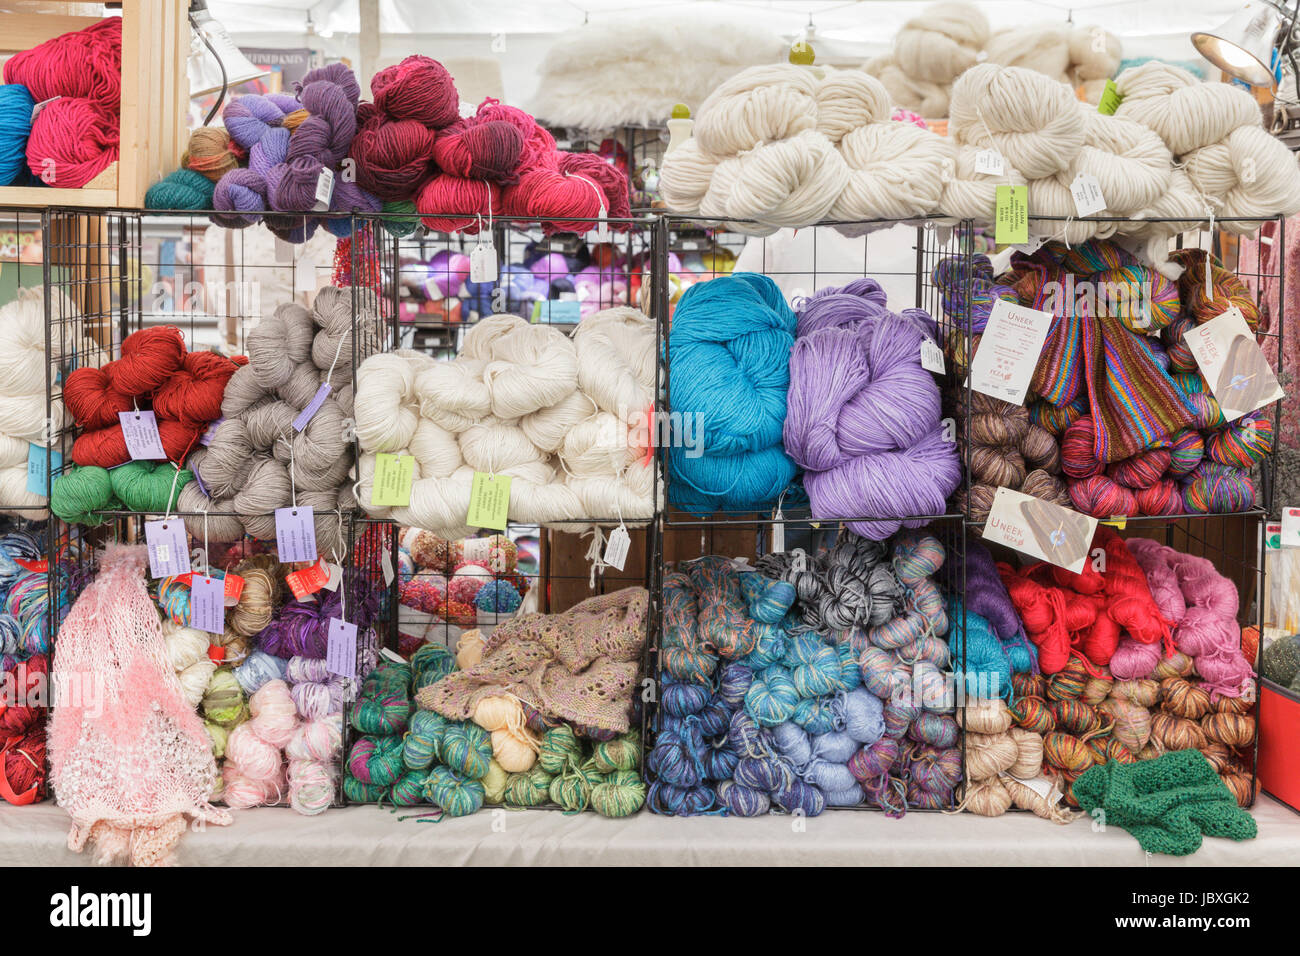 BOUCKVILLE, NY, USA - JUNE 10 2017: Skeins of merino wool and yak silk for sale at the annual Fiber Festival of Central New York. Stock Photo